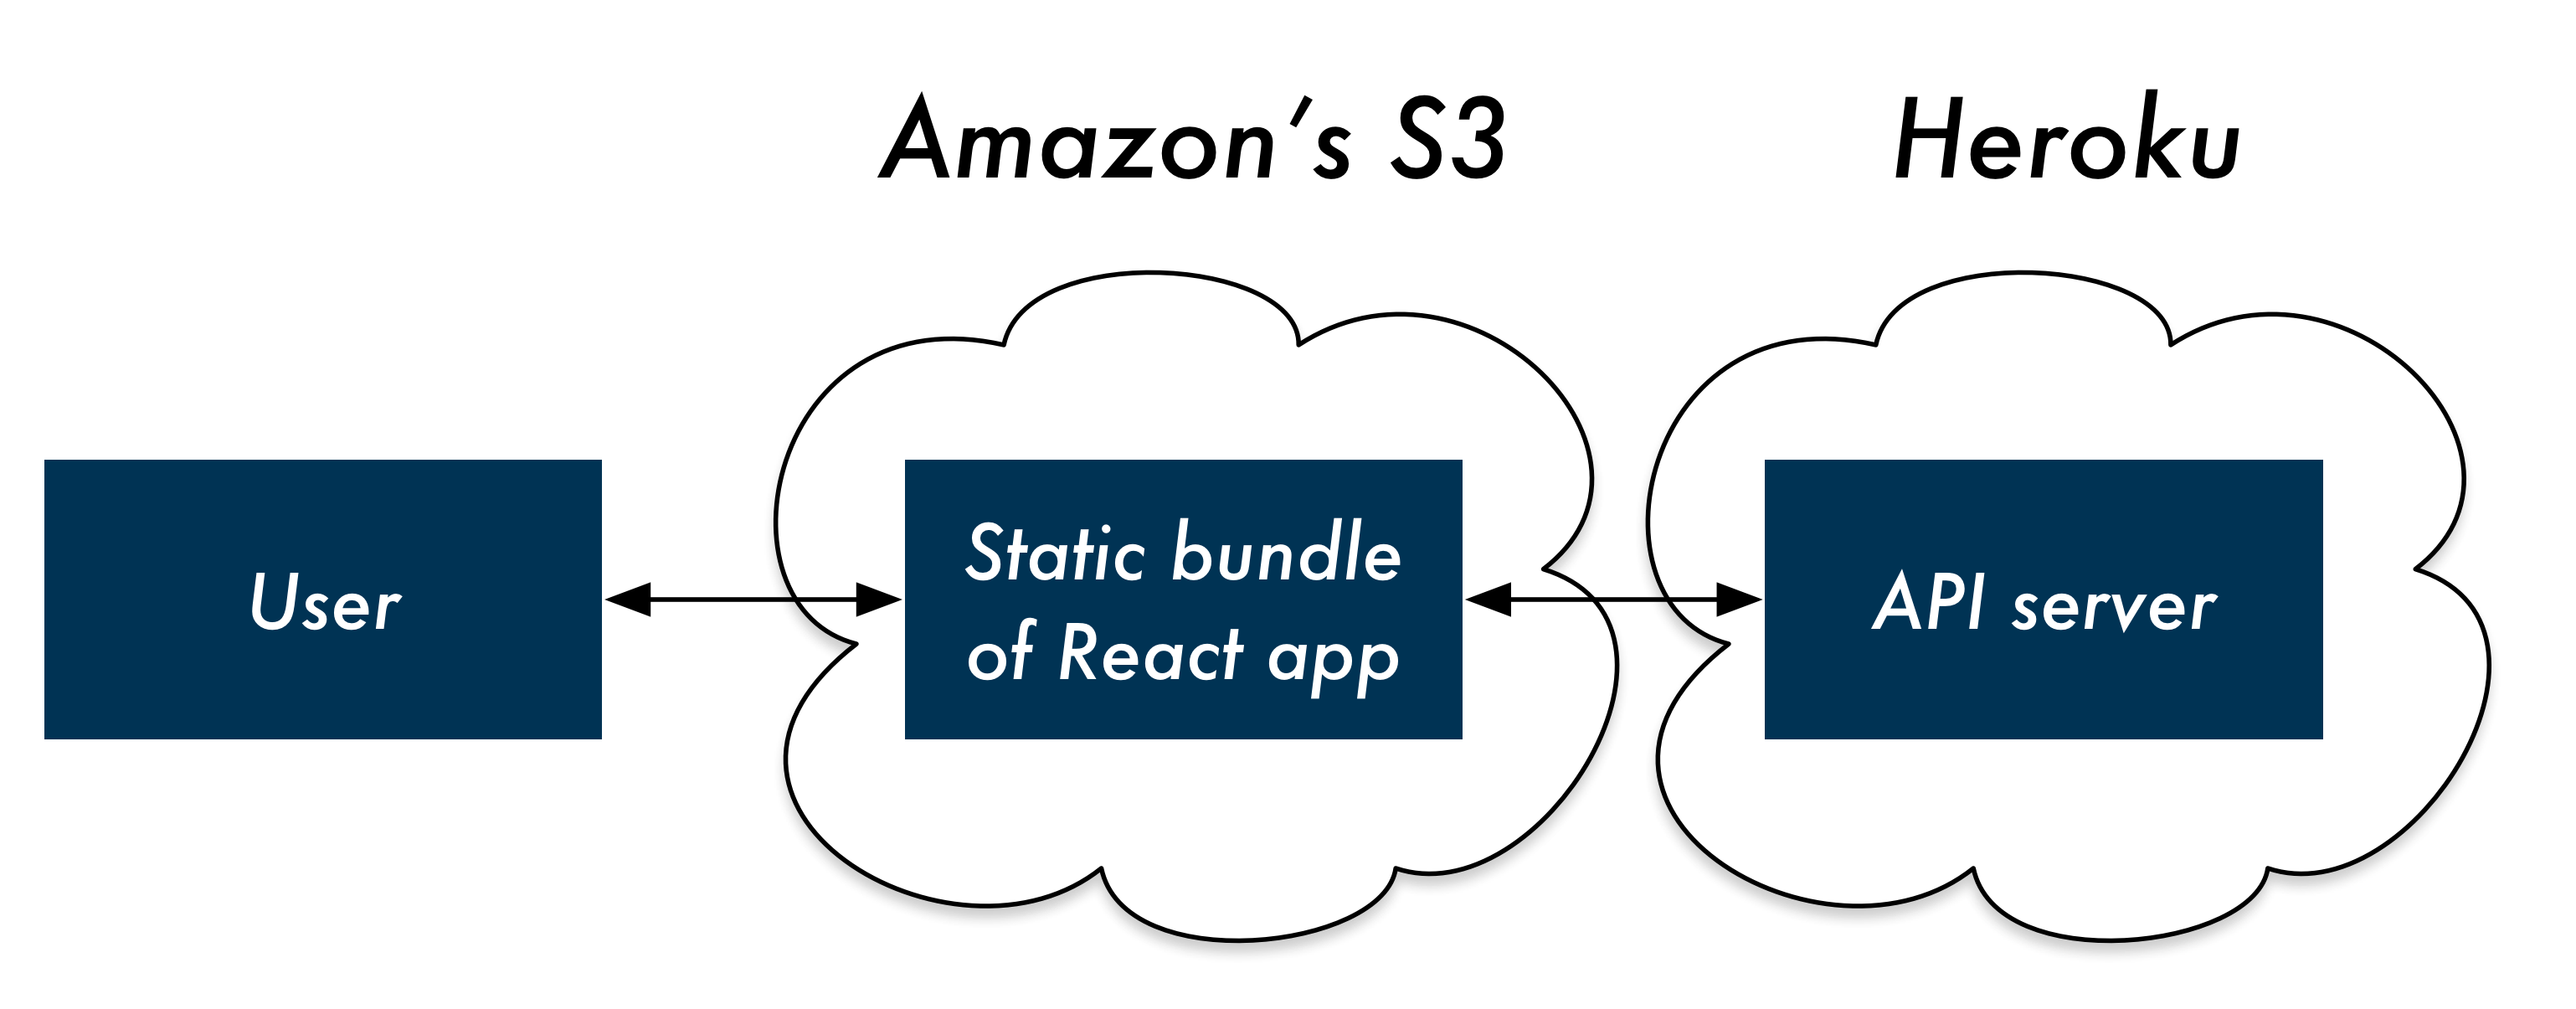 user's browser talks to React app on S3 which talks to API server on Heroku